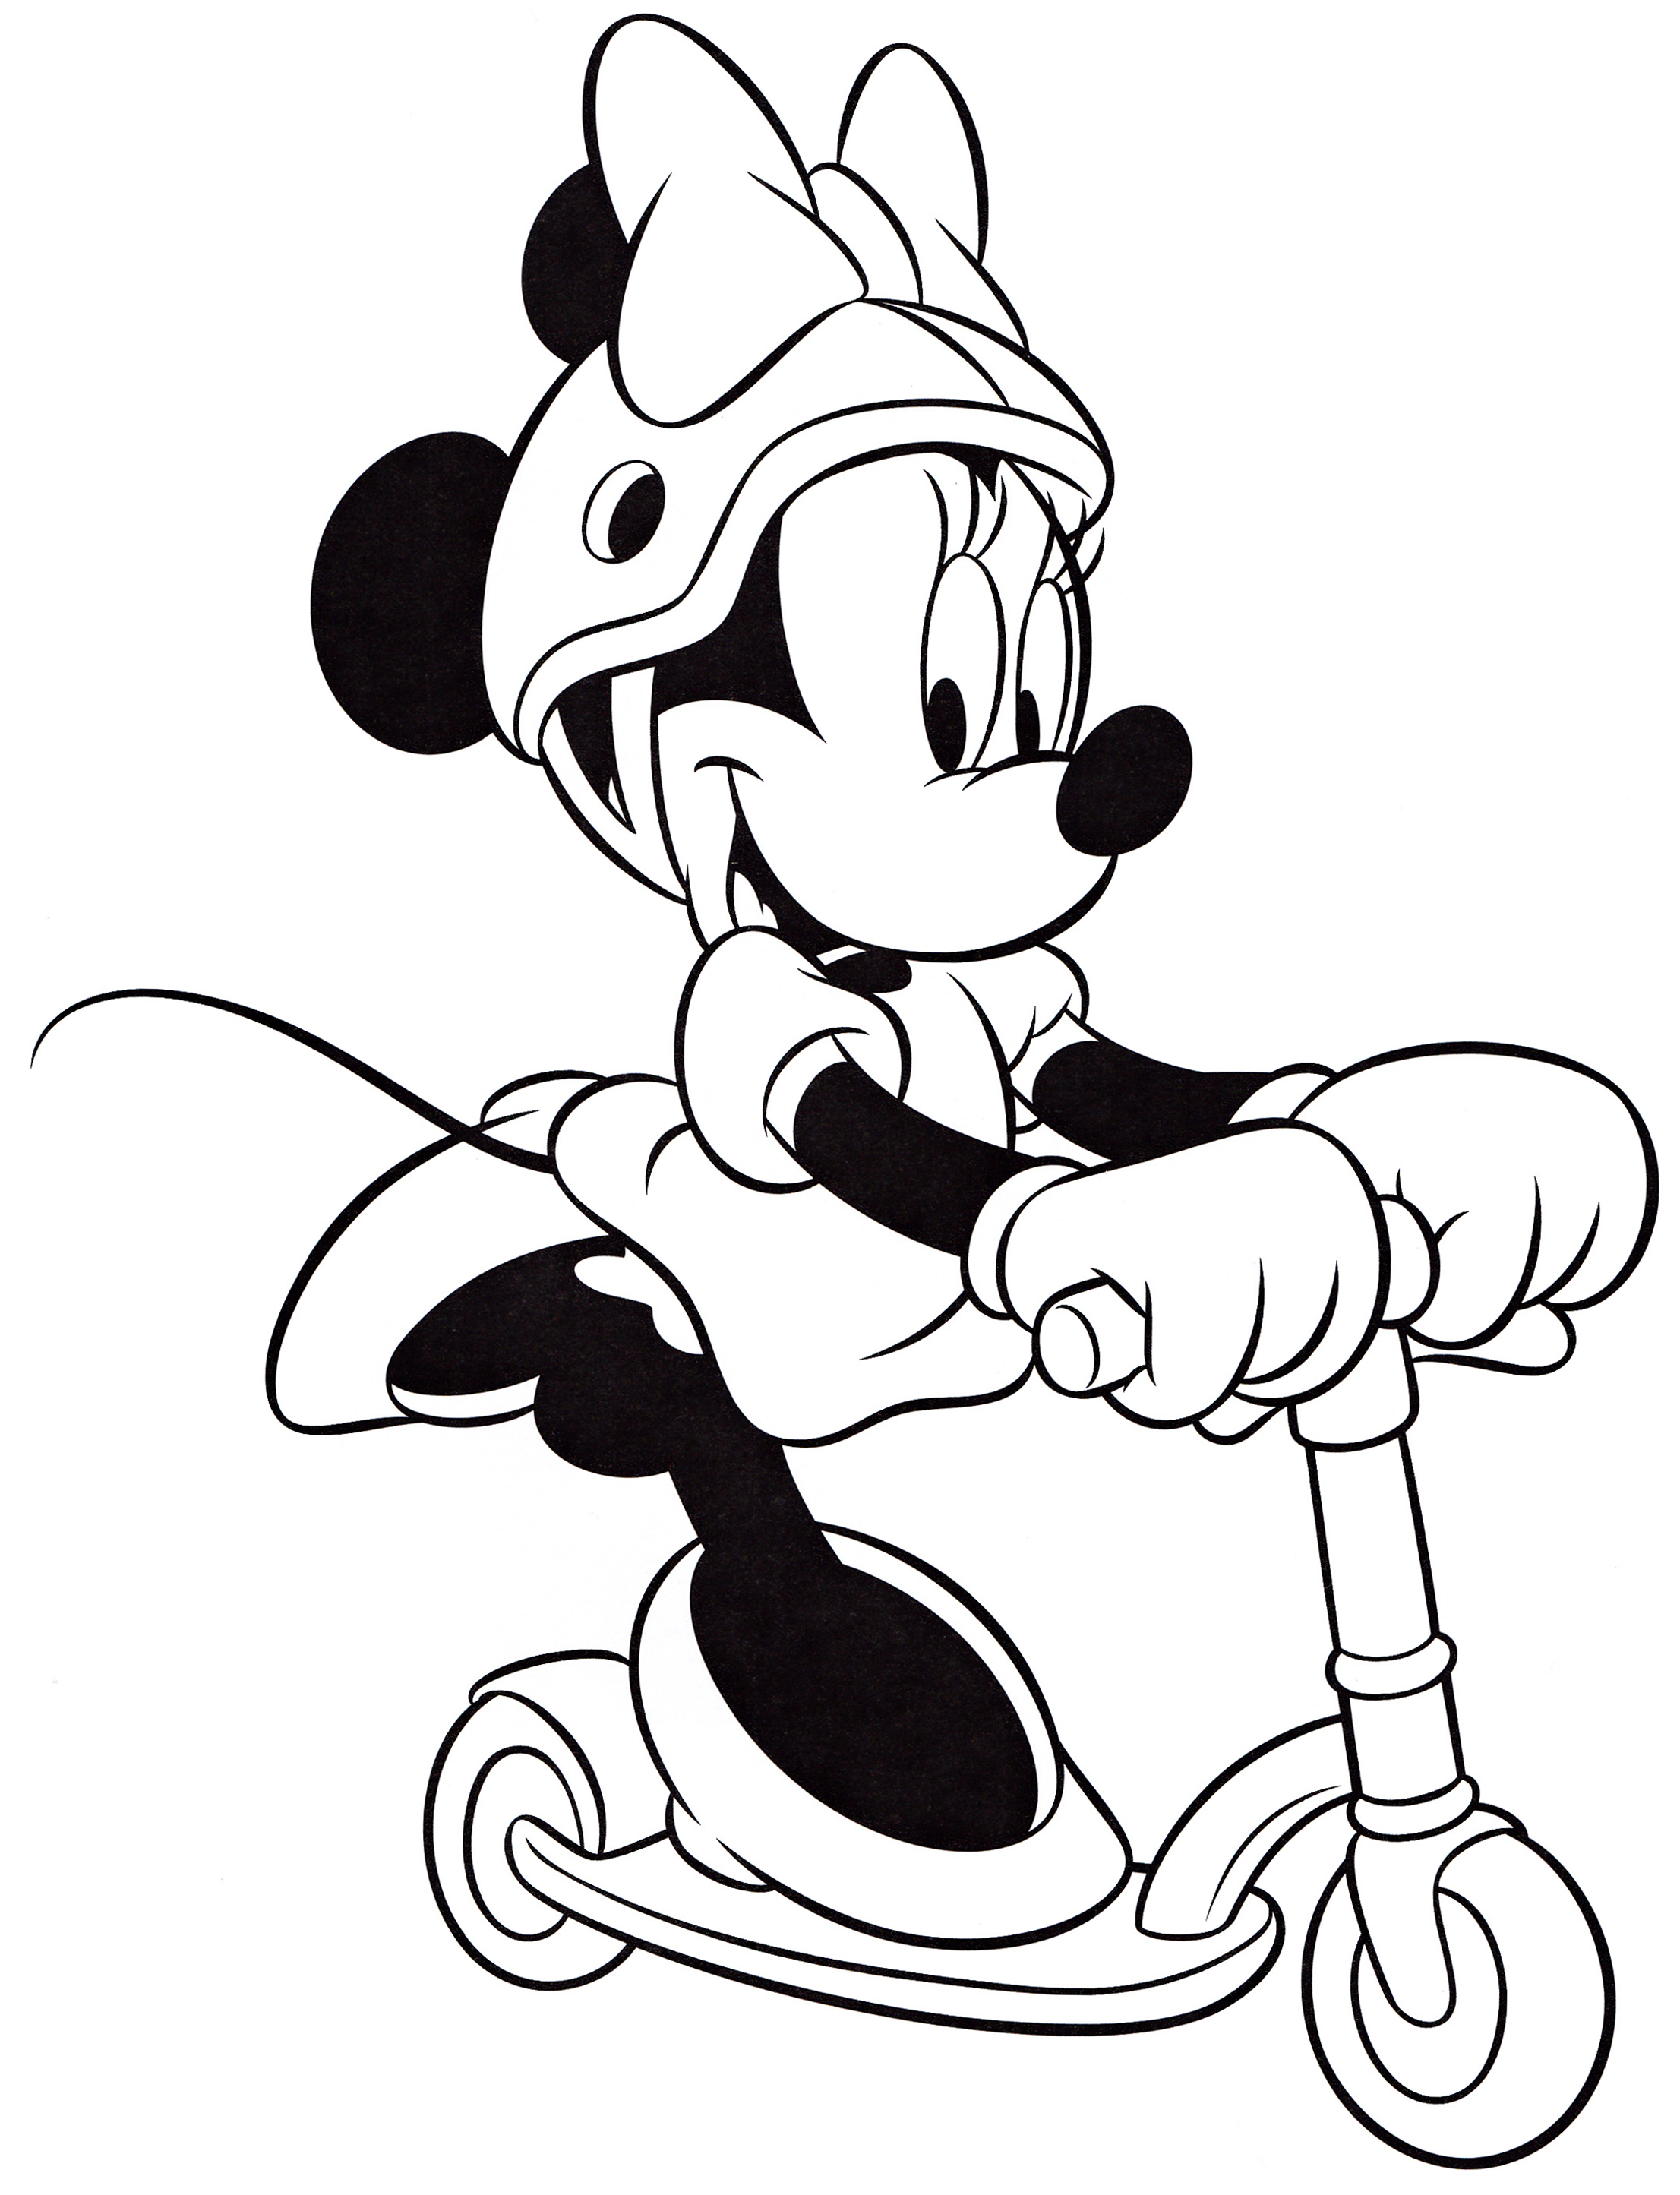 Walt Disney Coloring Pages – Minnie Mouse - Walt Disney Characters